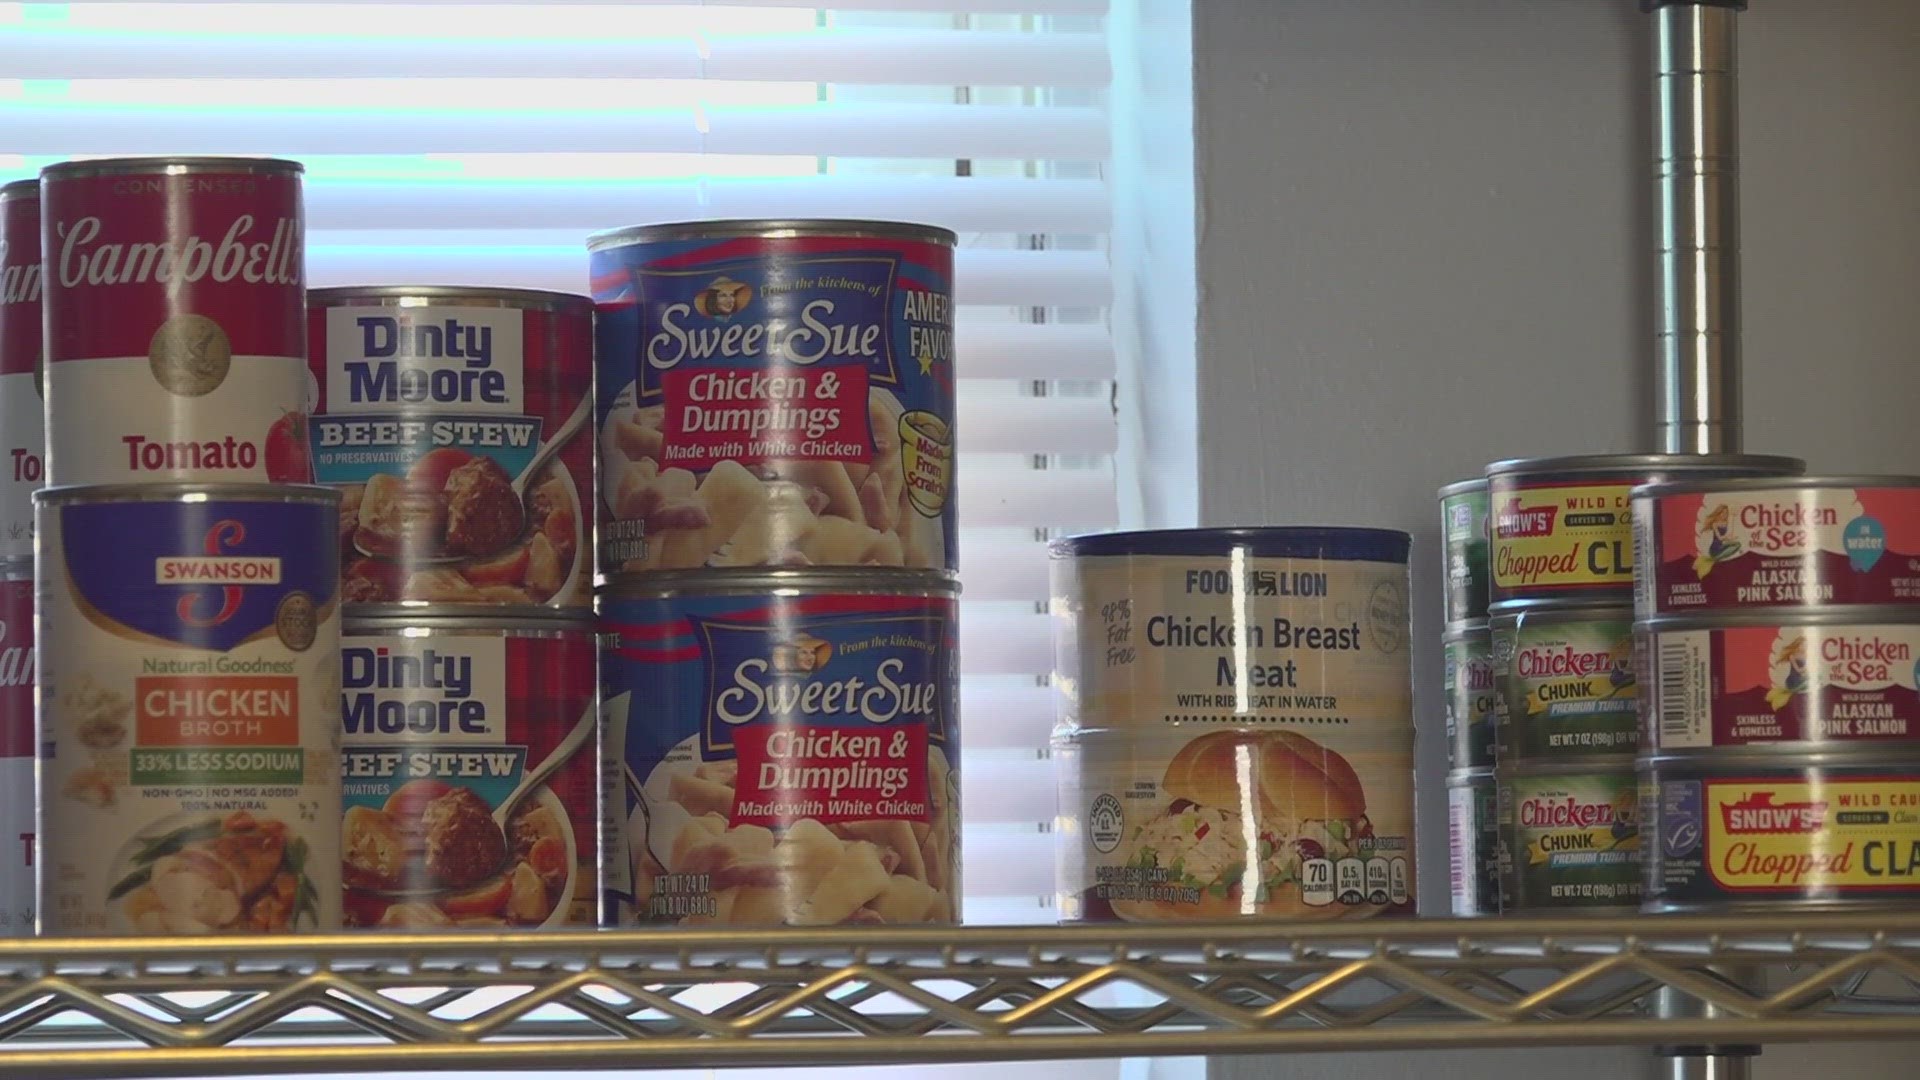 Triad food pantry says they are in need of more canned food items ...